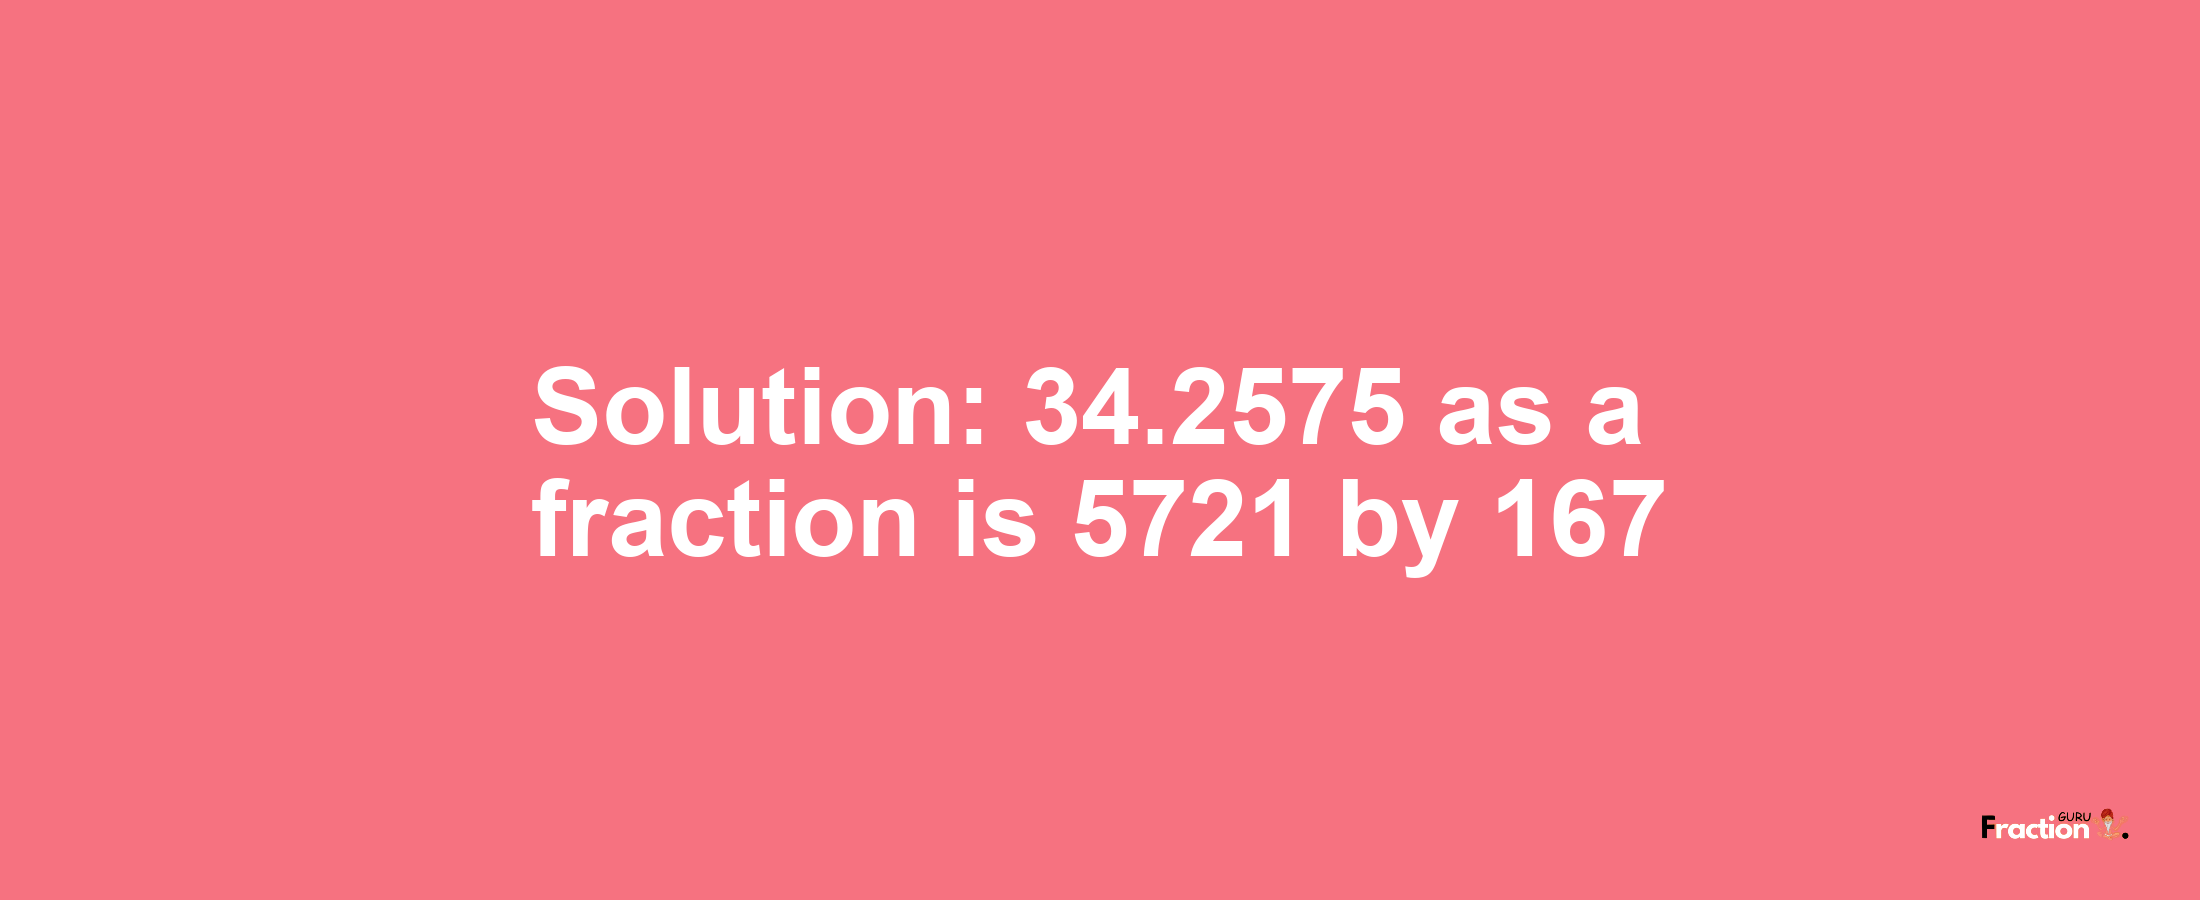 Solution:34.2575 as a fraction is 5721/167